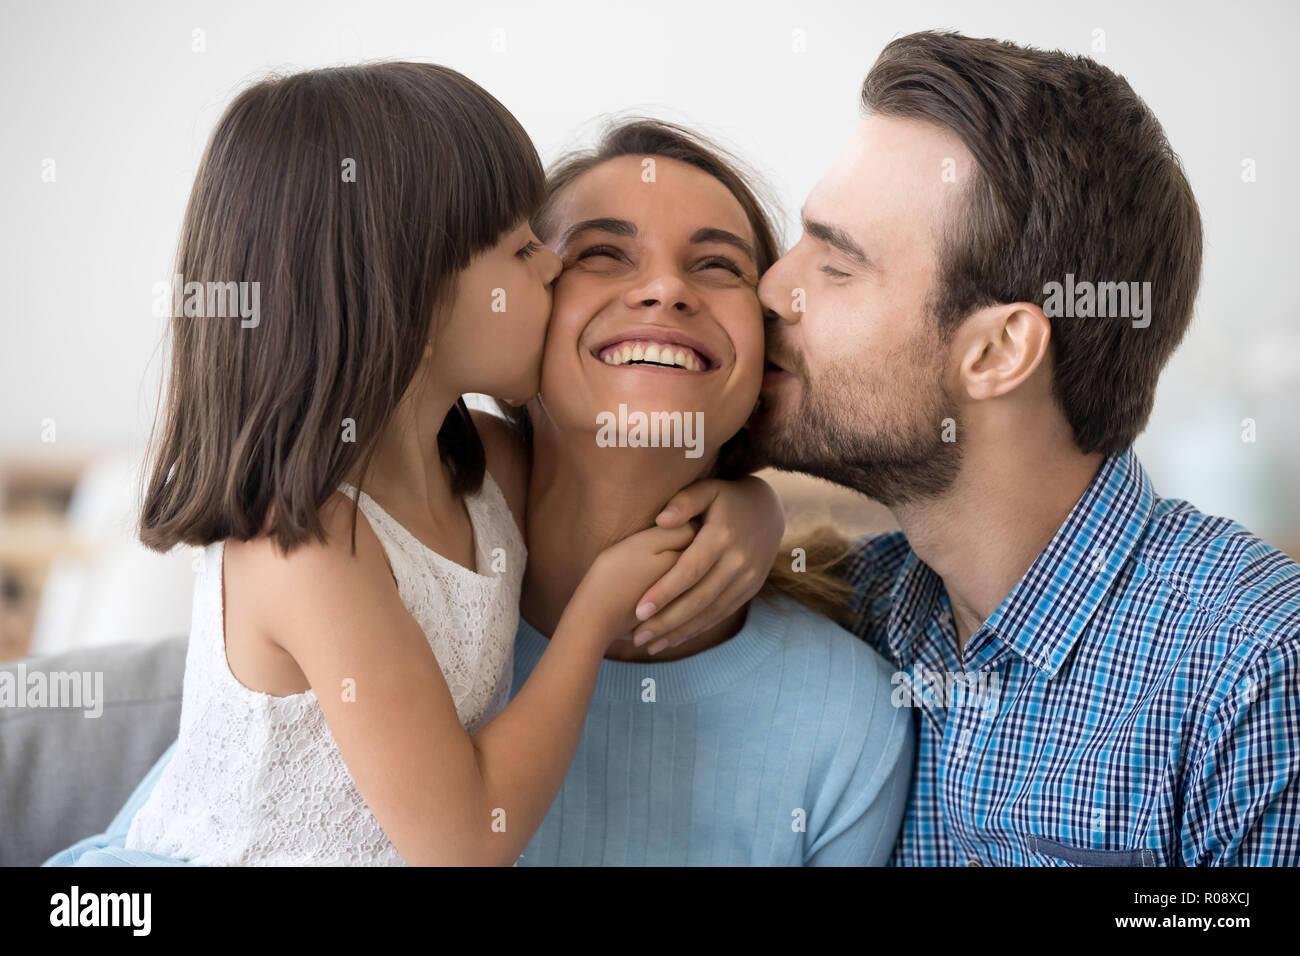 Little girl and man kissing woman happy family indoors Stock Photo